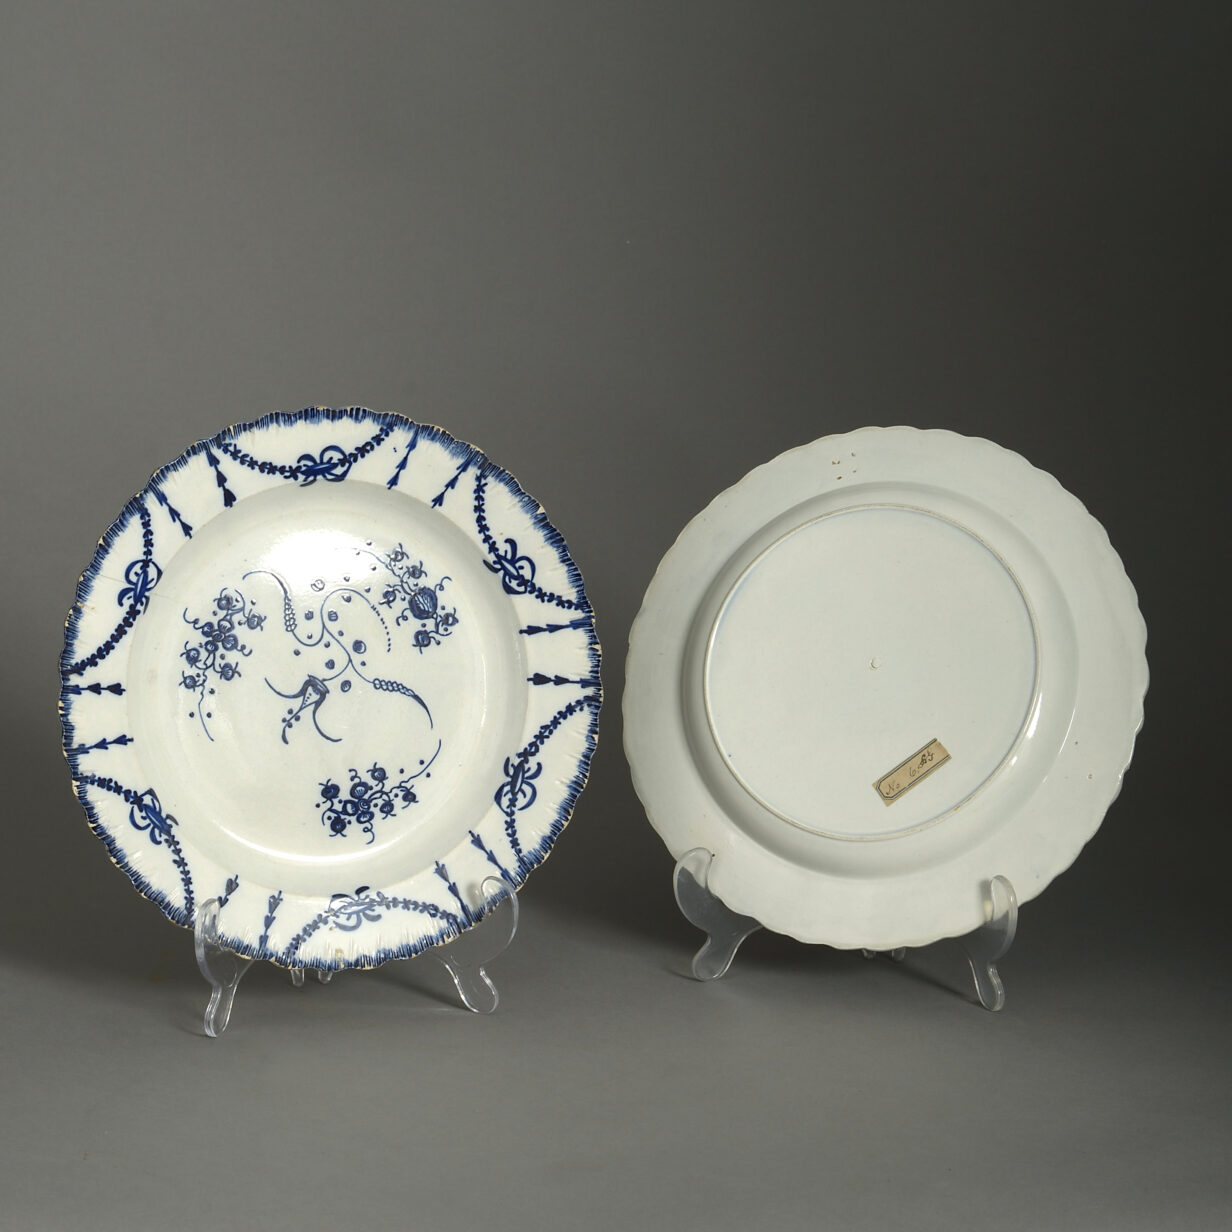 Pair of late 18th century blue and white staffordshire pottery plates